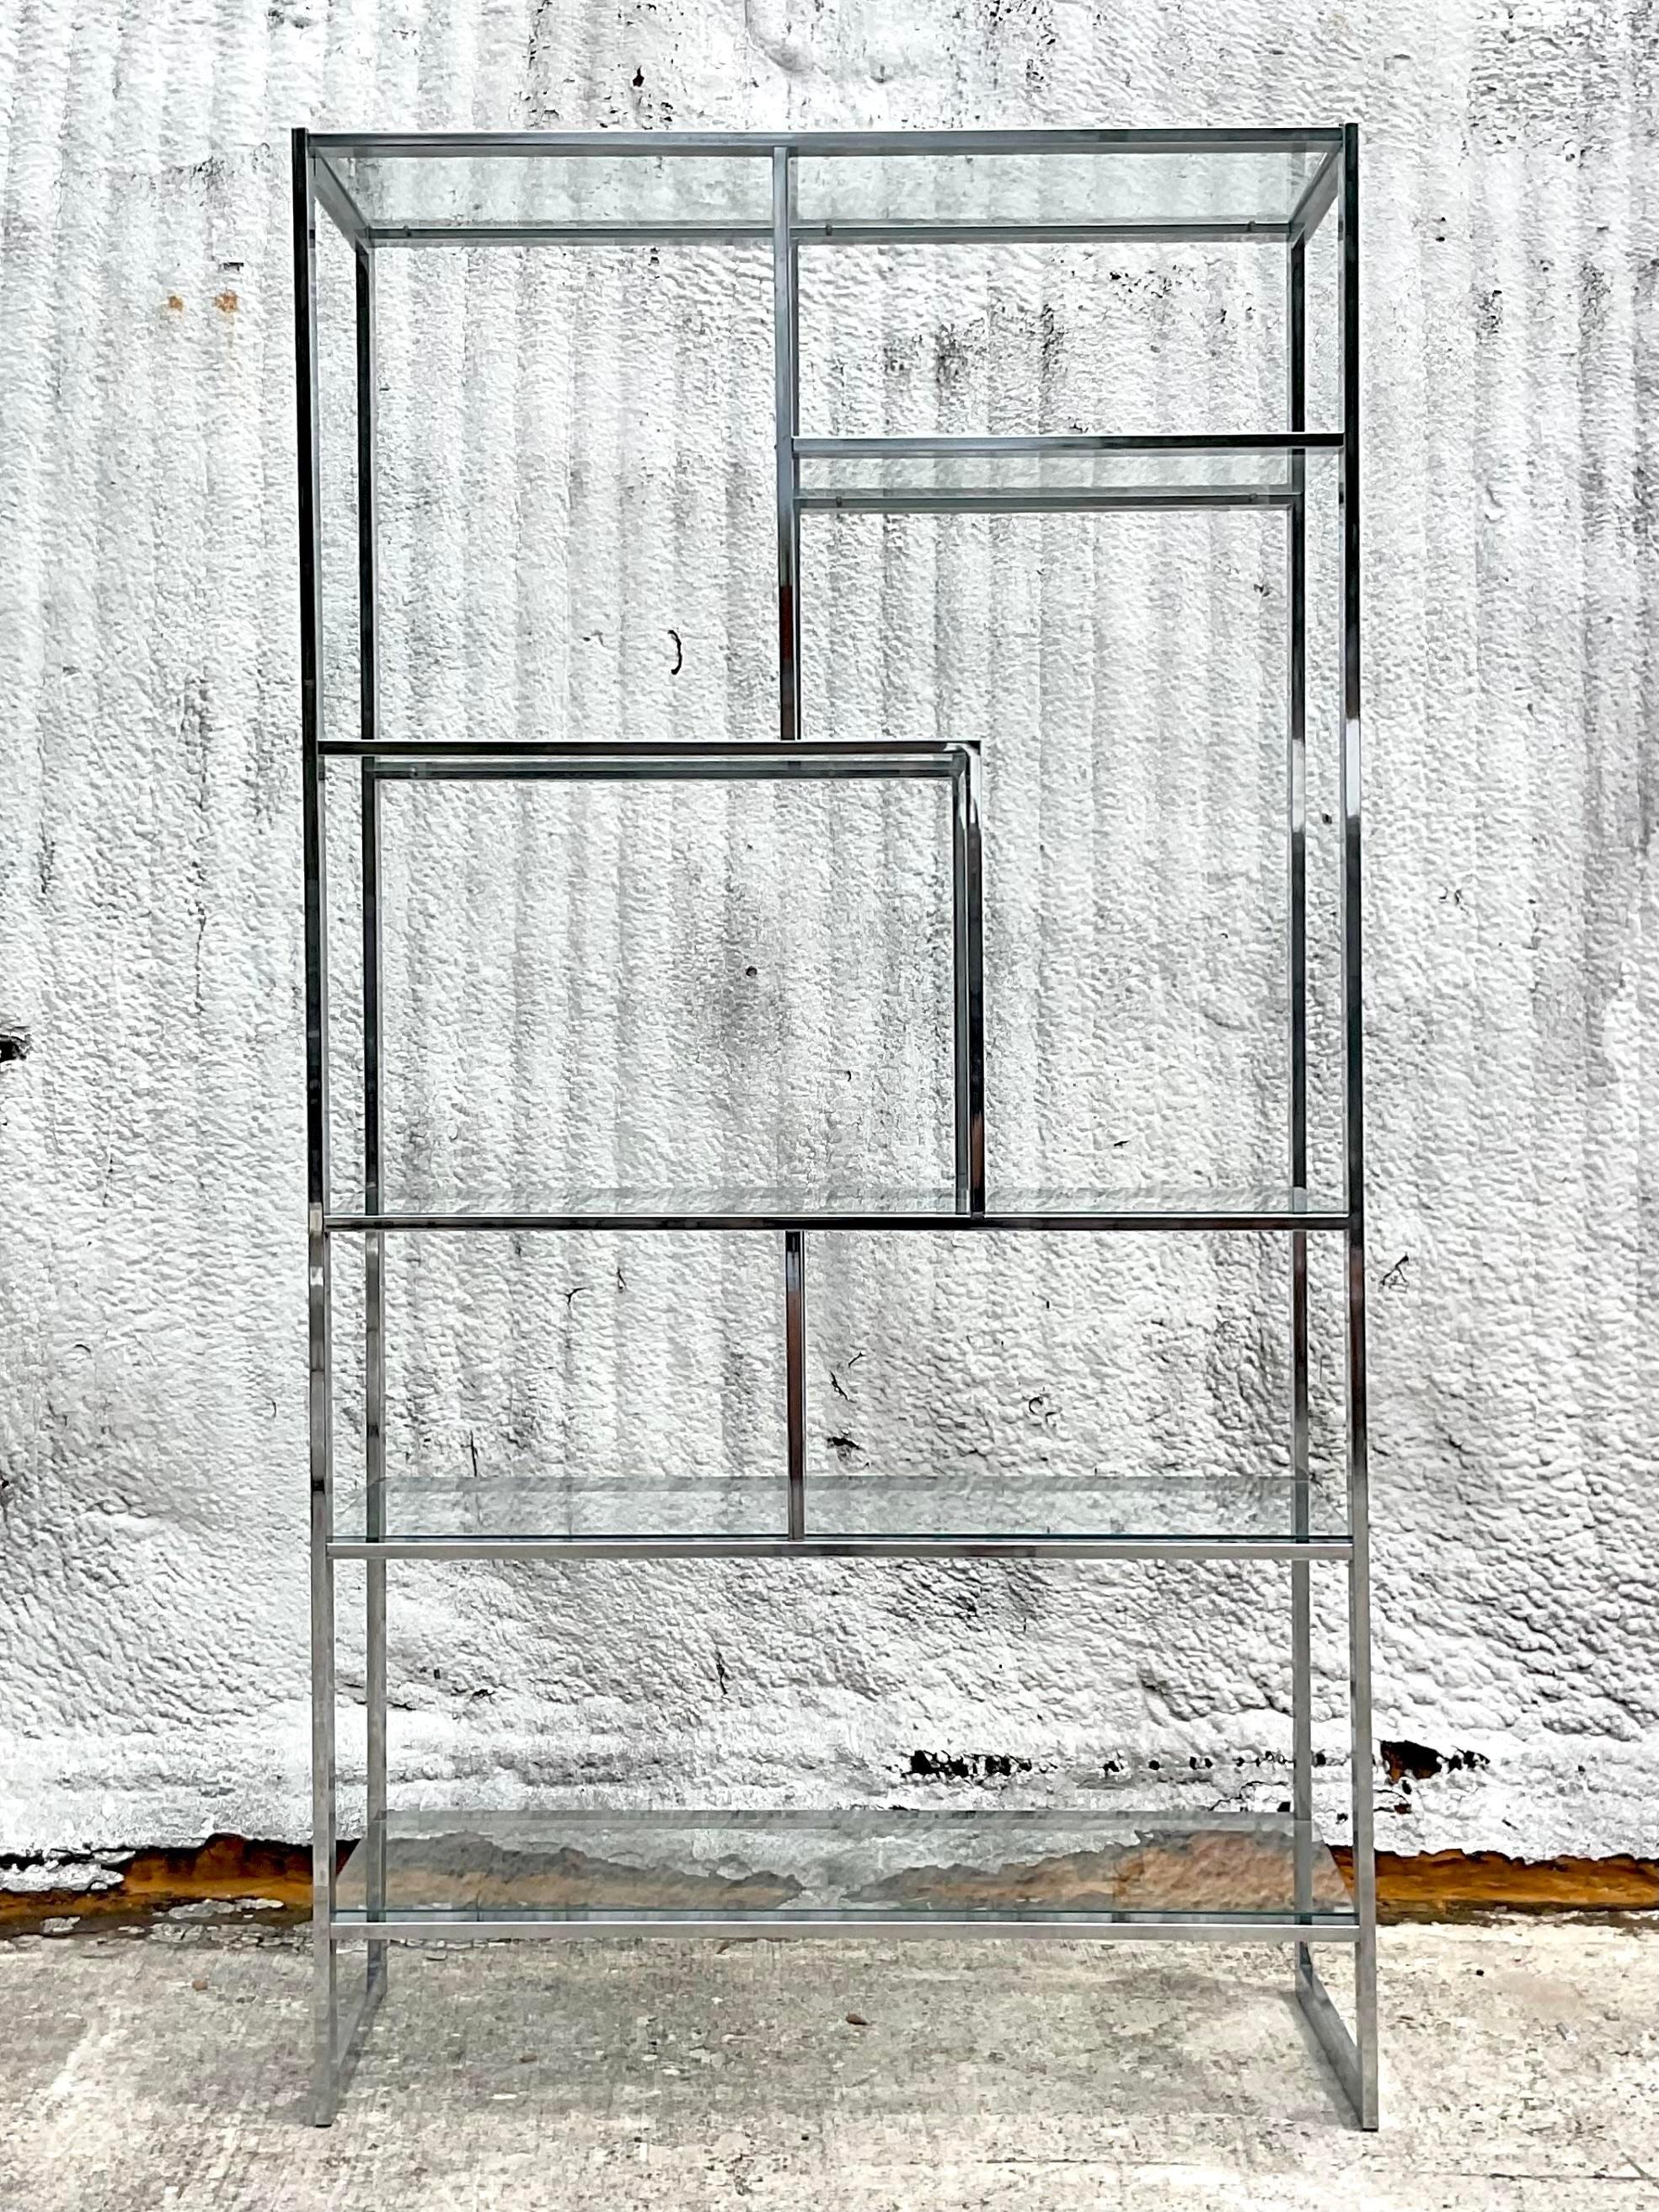 Boho Chic with American Flair: Vintage Polished Chrome Etagere Inspired by DIA. Elevate your space with this iconic piece, blending bohemian sophistication with American craftsmanship for a stylish and functional storage solution.